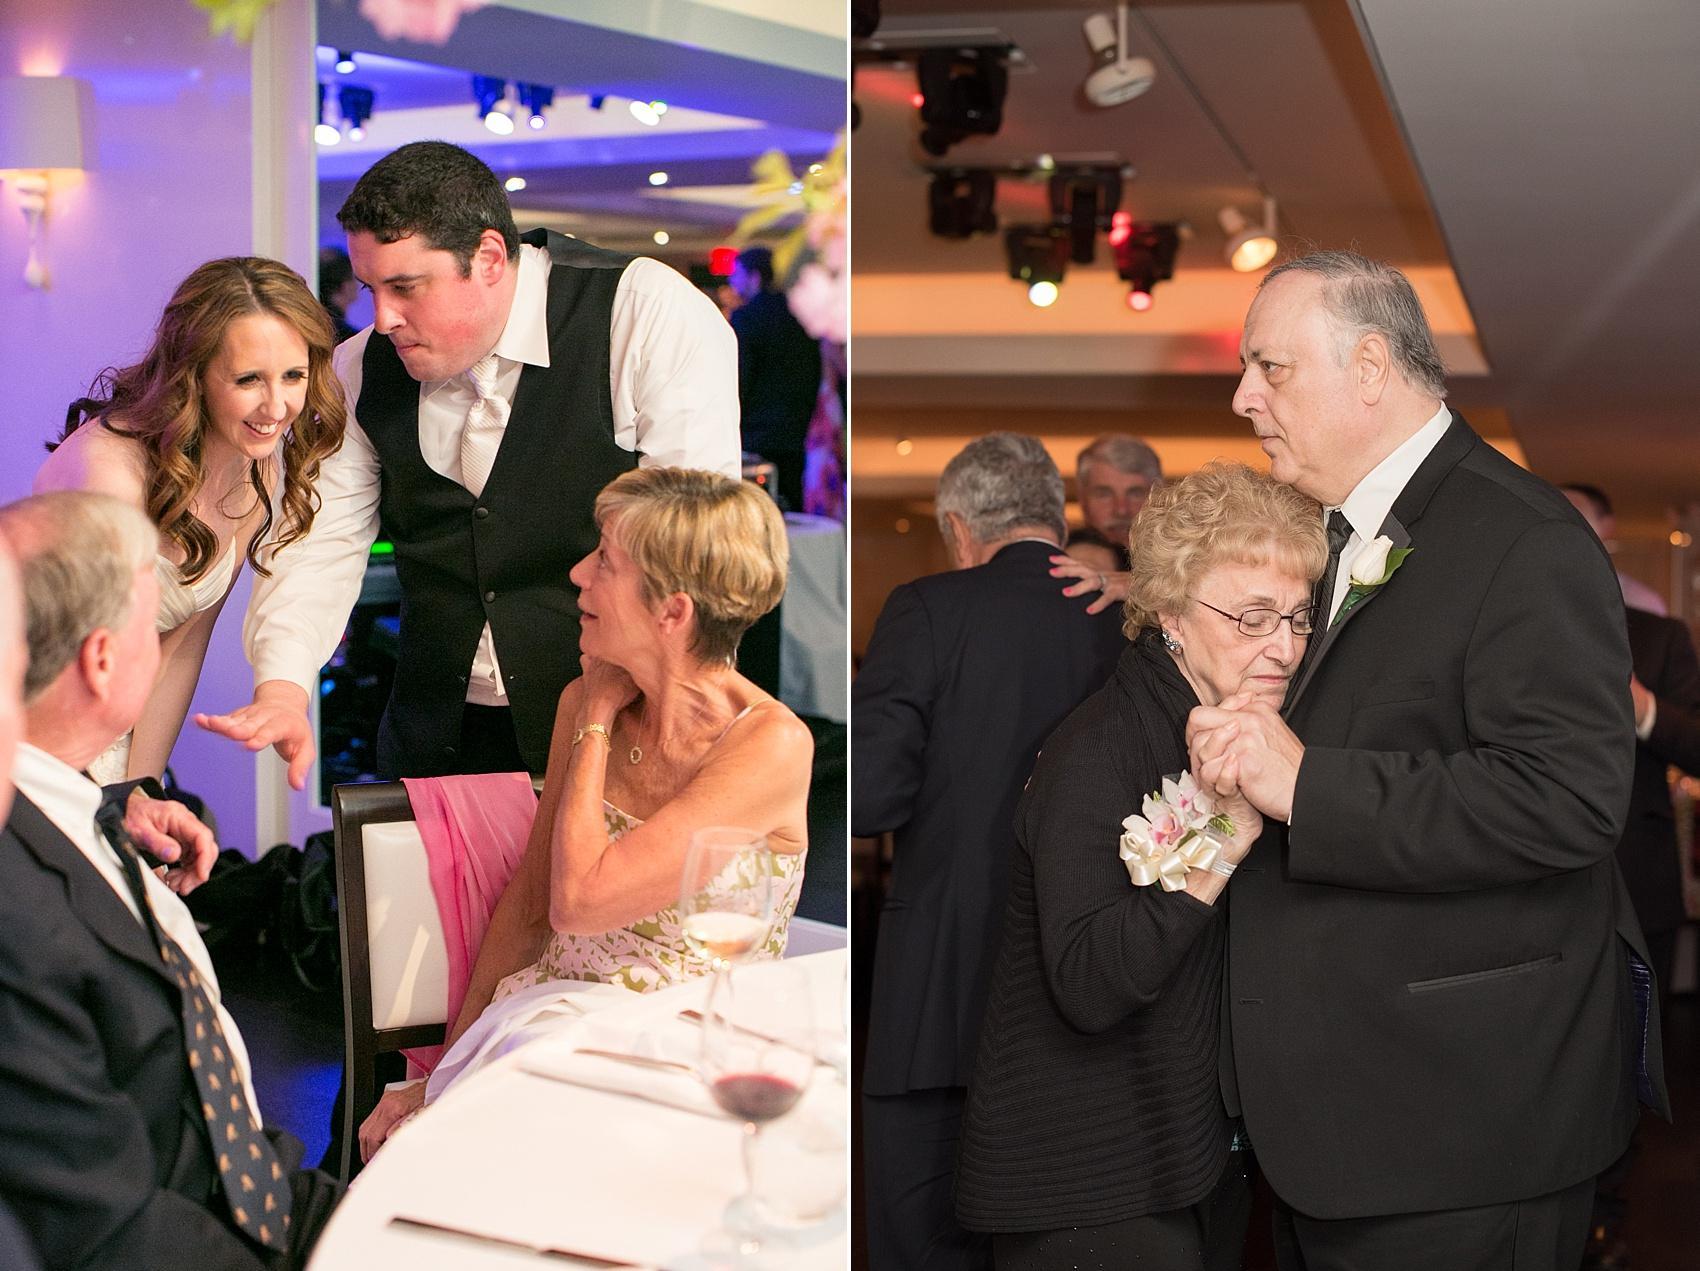 Photos by Mikkel Paige Photography for a wedding at Harbor Club on Long Island. The father of the groom dances with his mother, the grandmother of the couple.